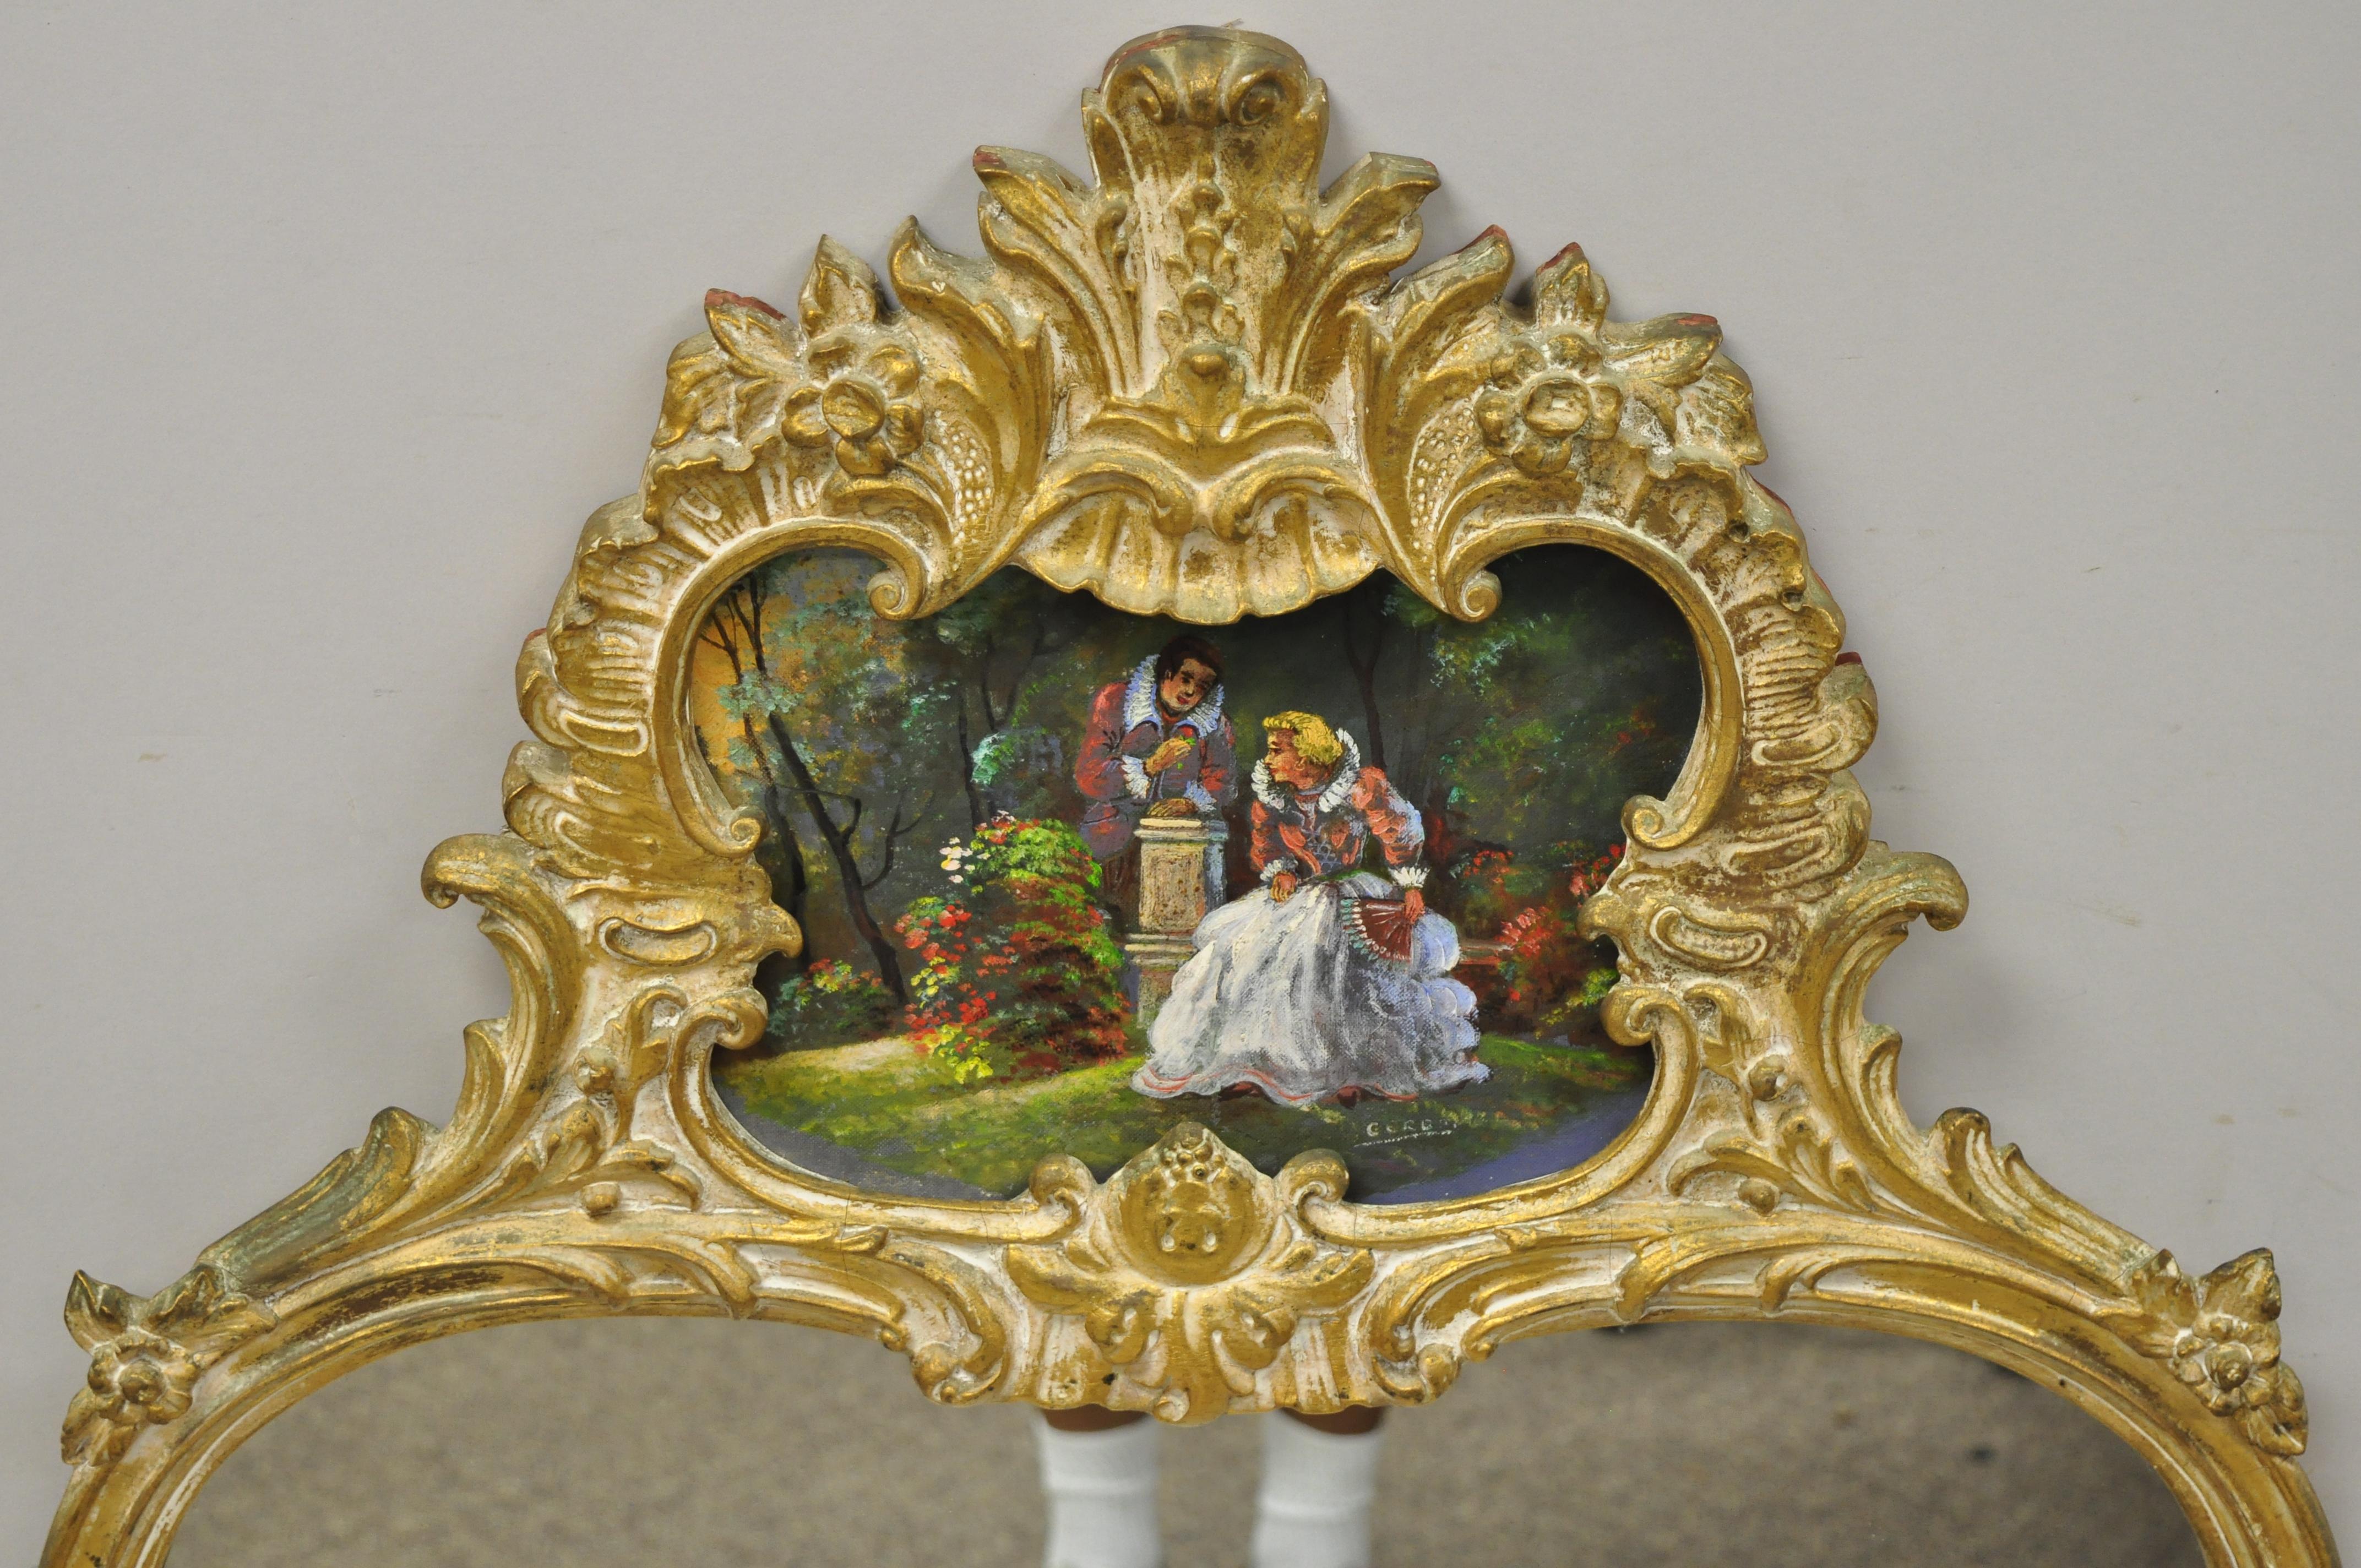 Vintage gold giltwood French Victorian style wall mirror with painted courting scene. Item features a gold giltwood frame, painted courting scene to crest, very nice vintage item, great style and form, circa mid-20th century. Measurements: 50